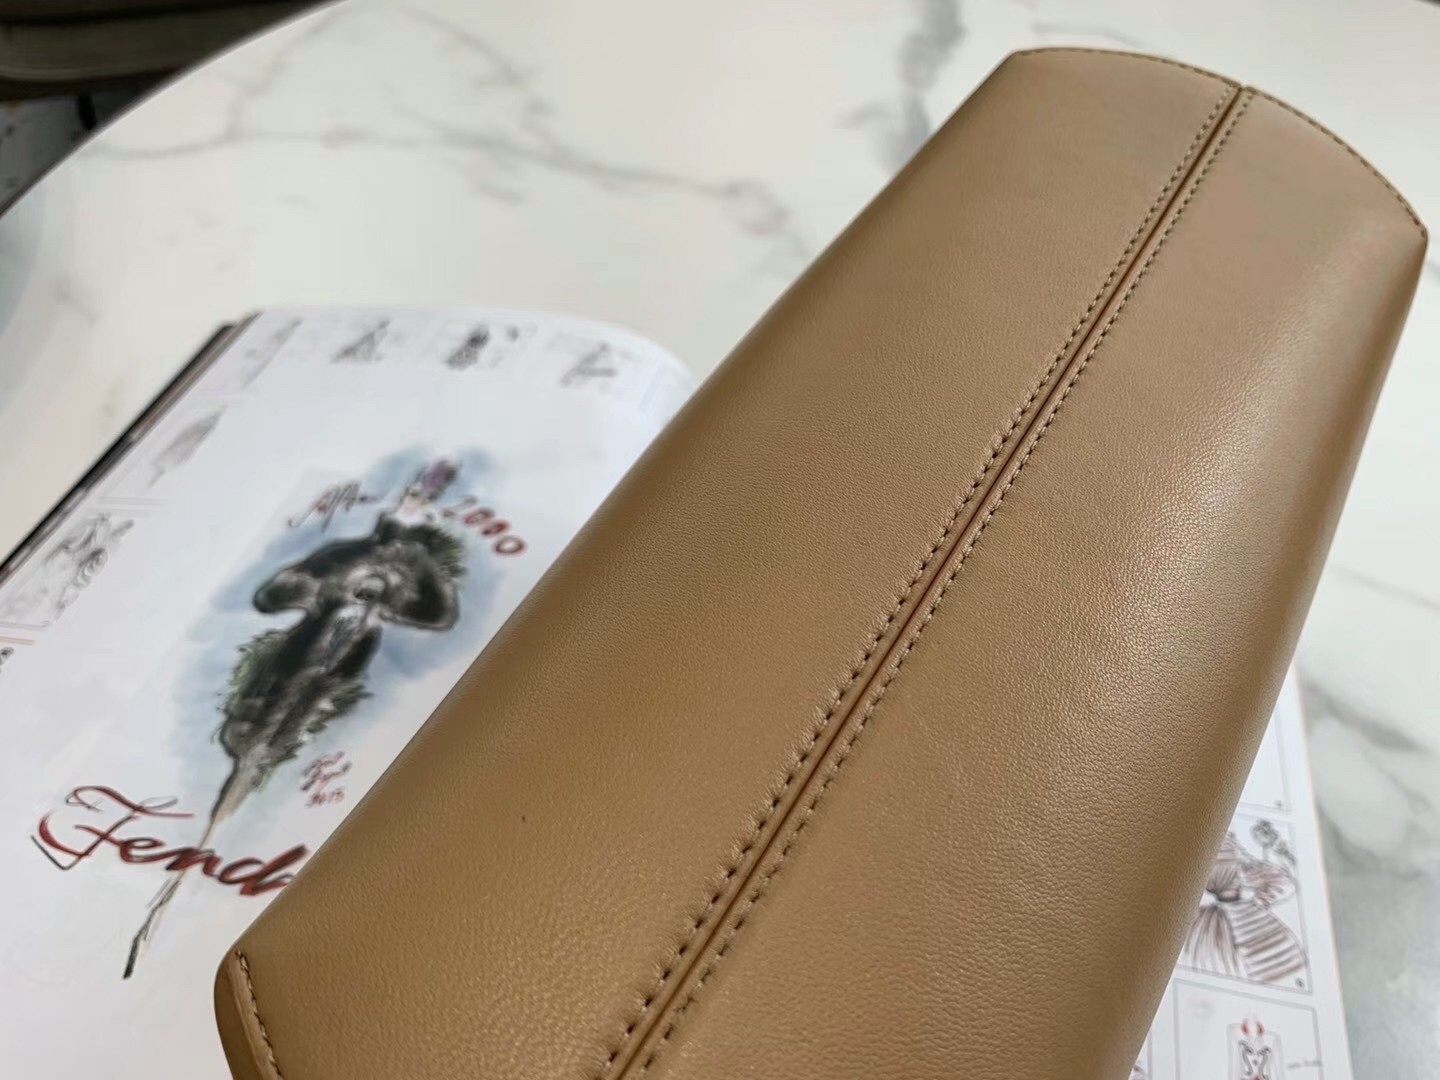 Fendi First Small Bag In Beige Nappa Leather 128